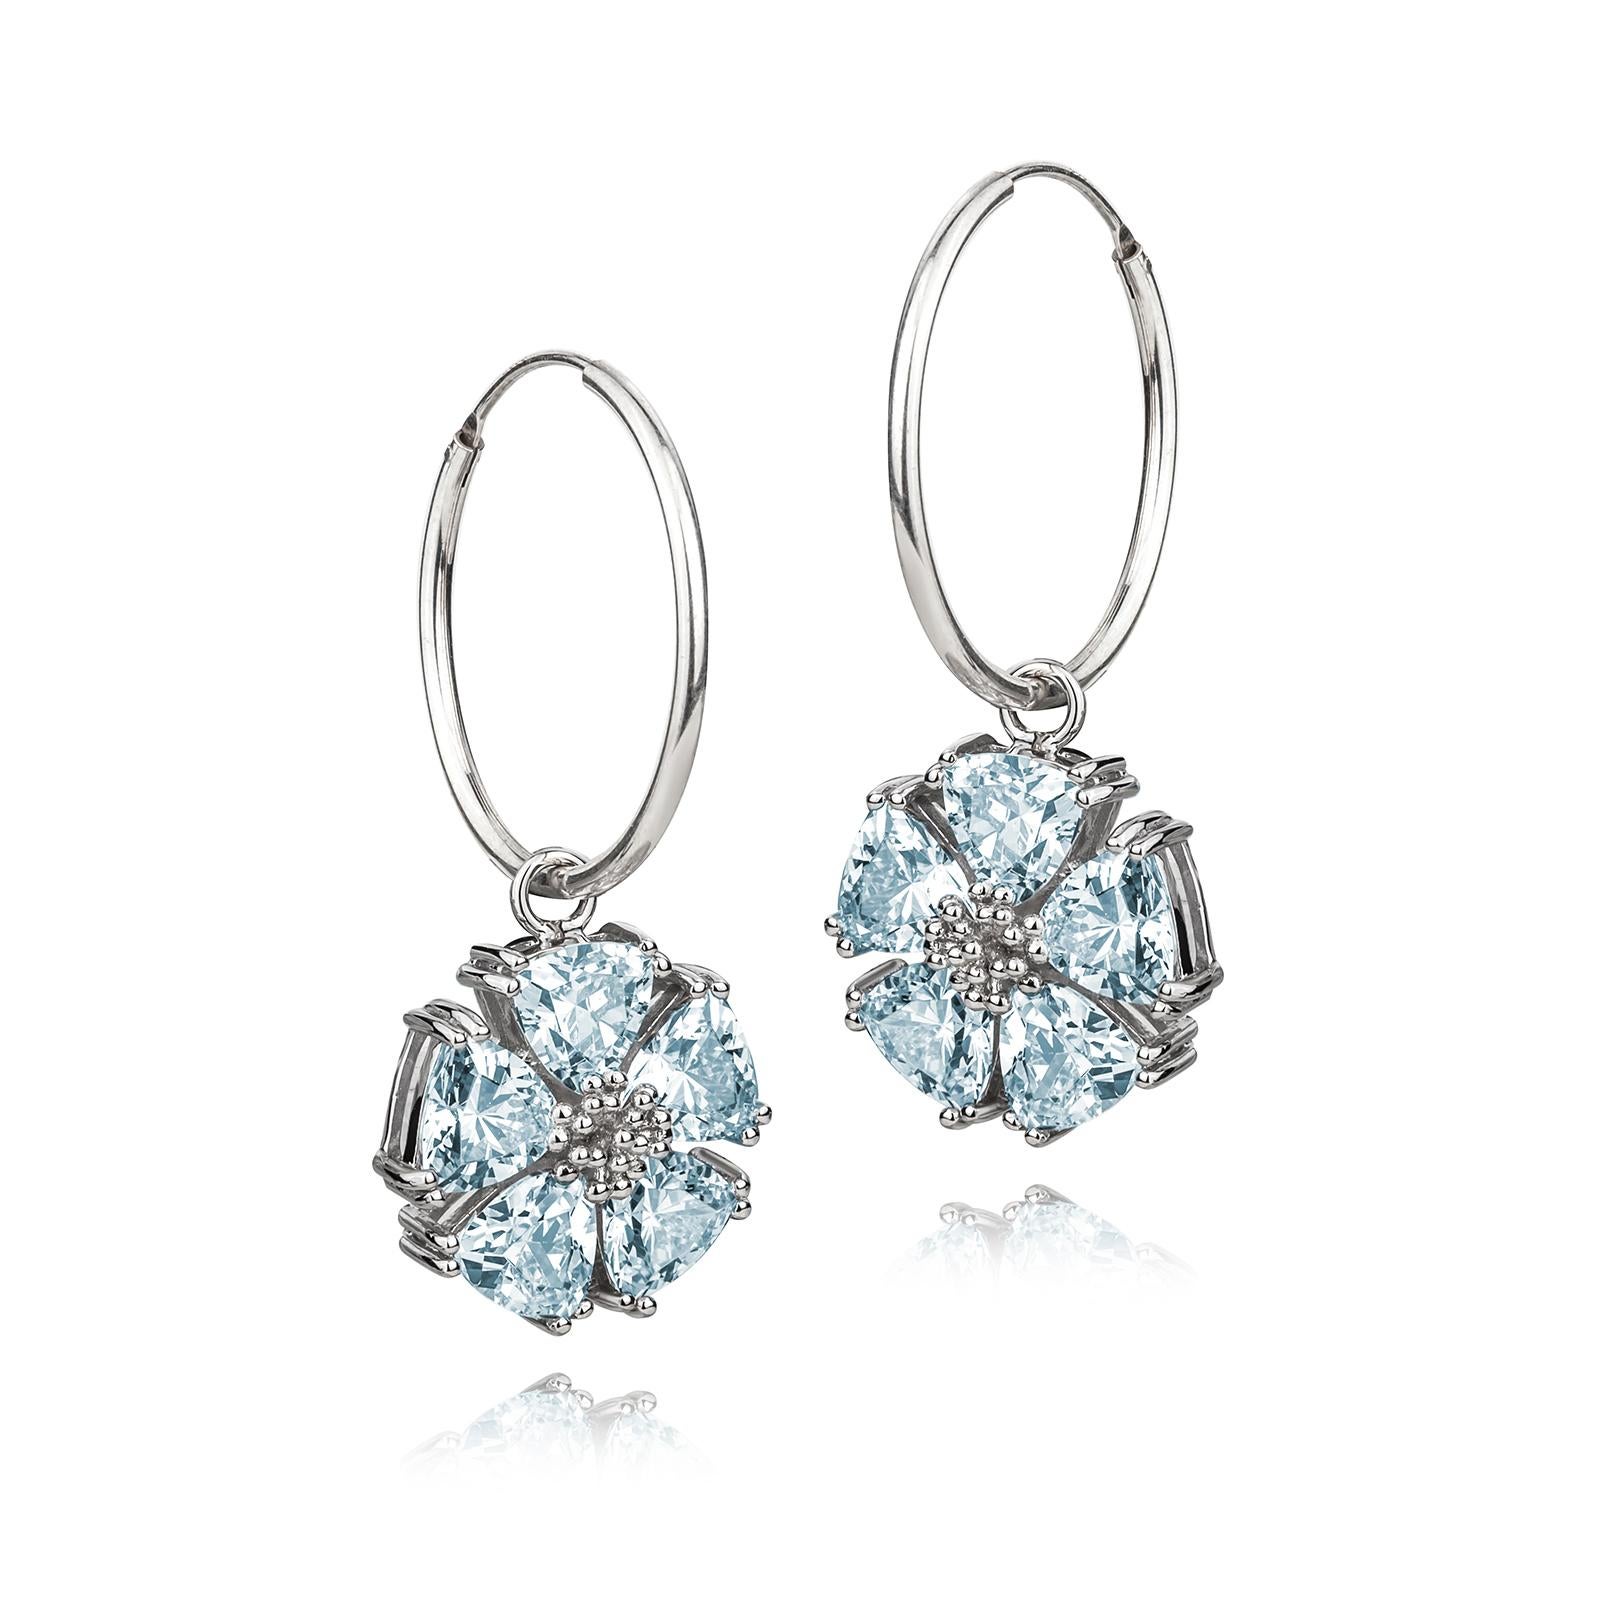 Designed in NYC

.925 Sterling Silver 10 x 7 mm Sky Blue and London Blue Topaz Blossom Stone Dangle Hoops. No matter the season, allow natural beauty to surround you wherever you go. Blossom stone dangle hoops: 

	Sterling silver 
	High-polish